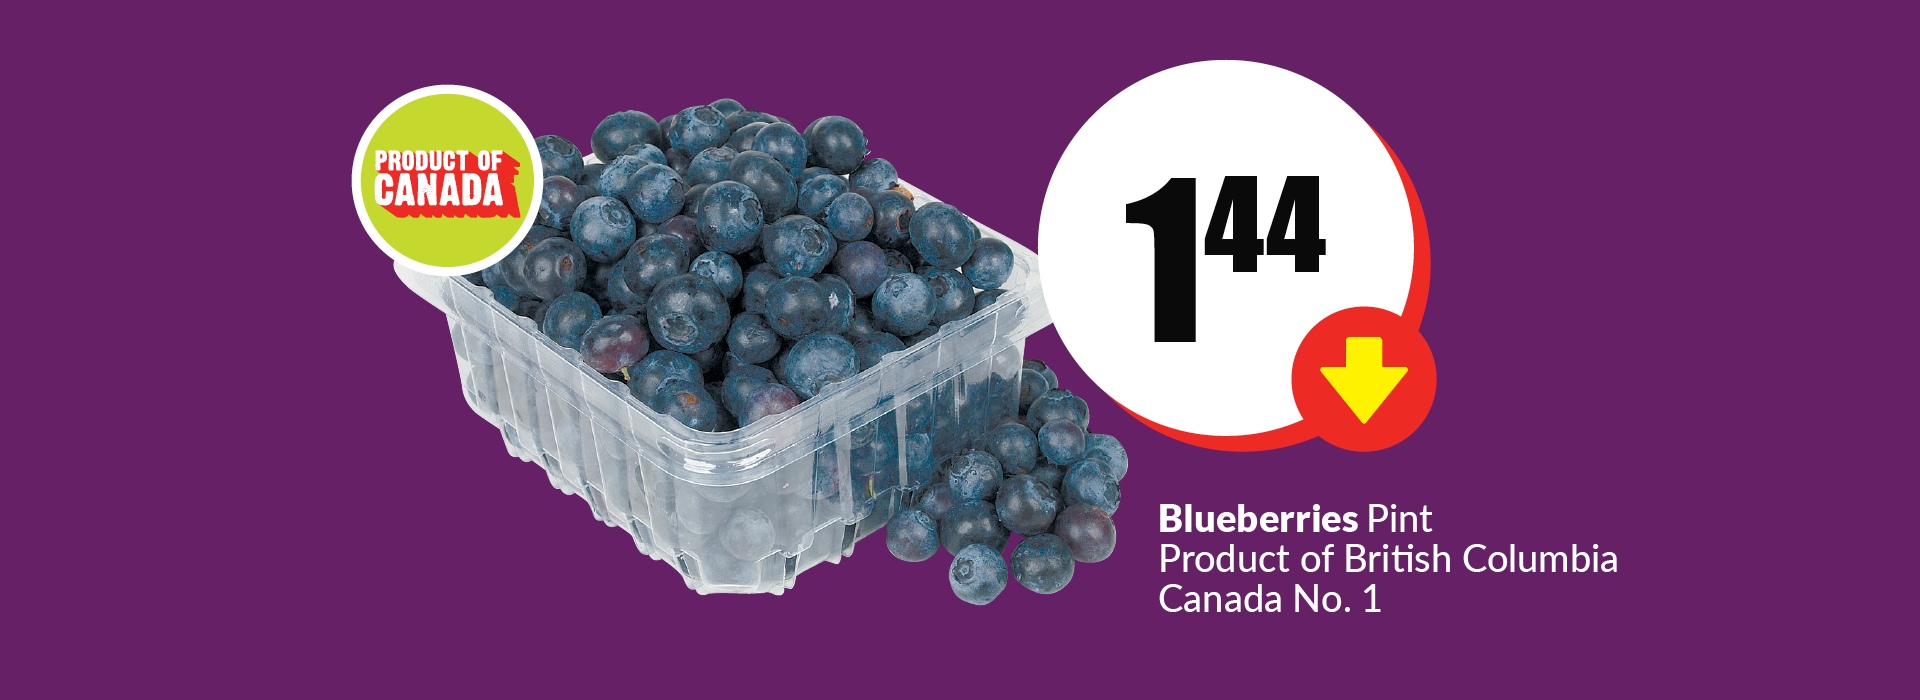 The following image contains the text, "Blueberries pint product of British Columbia Canada No. 1. Get them at just $1.44."